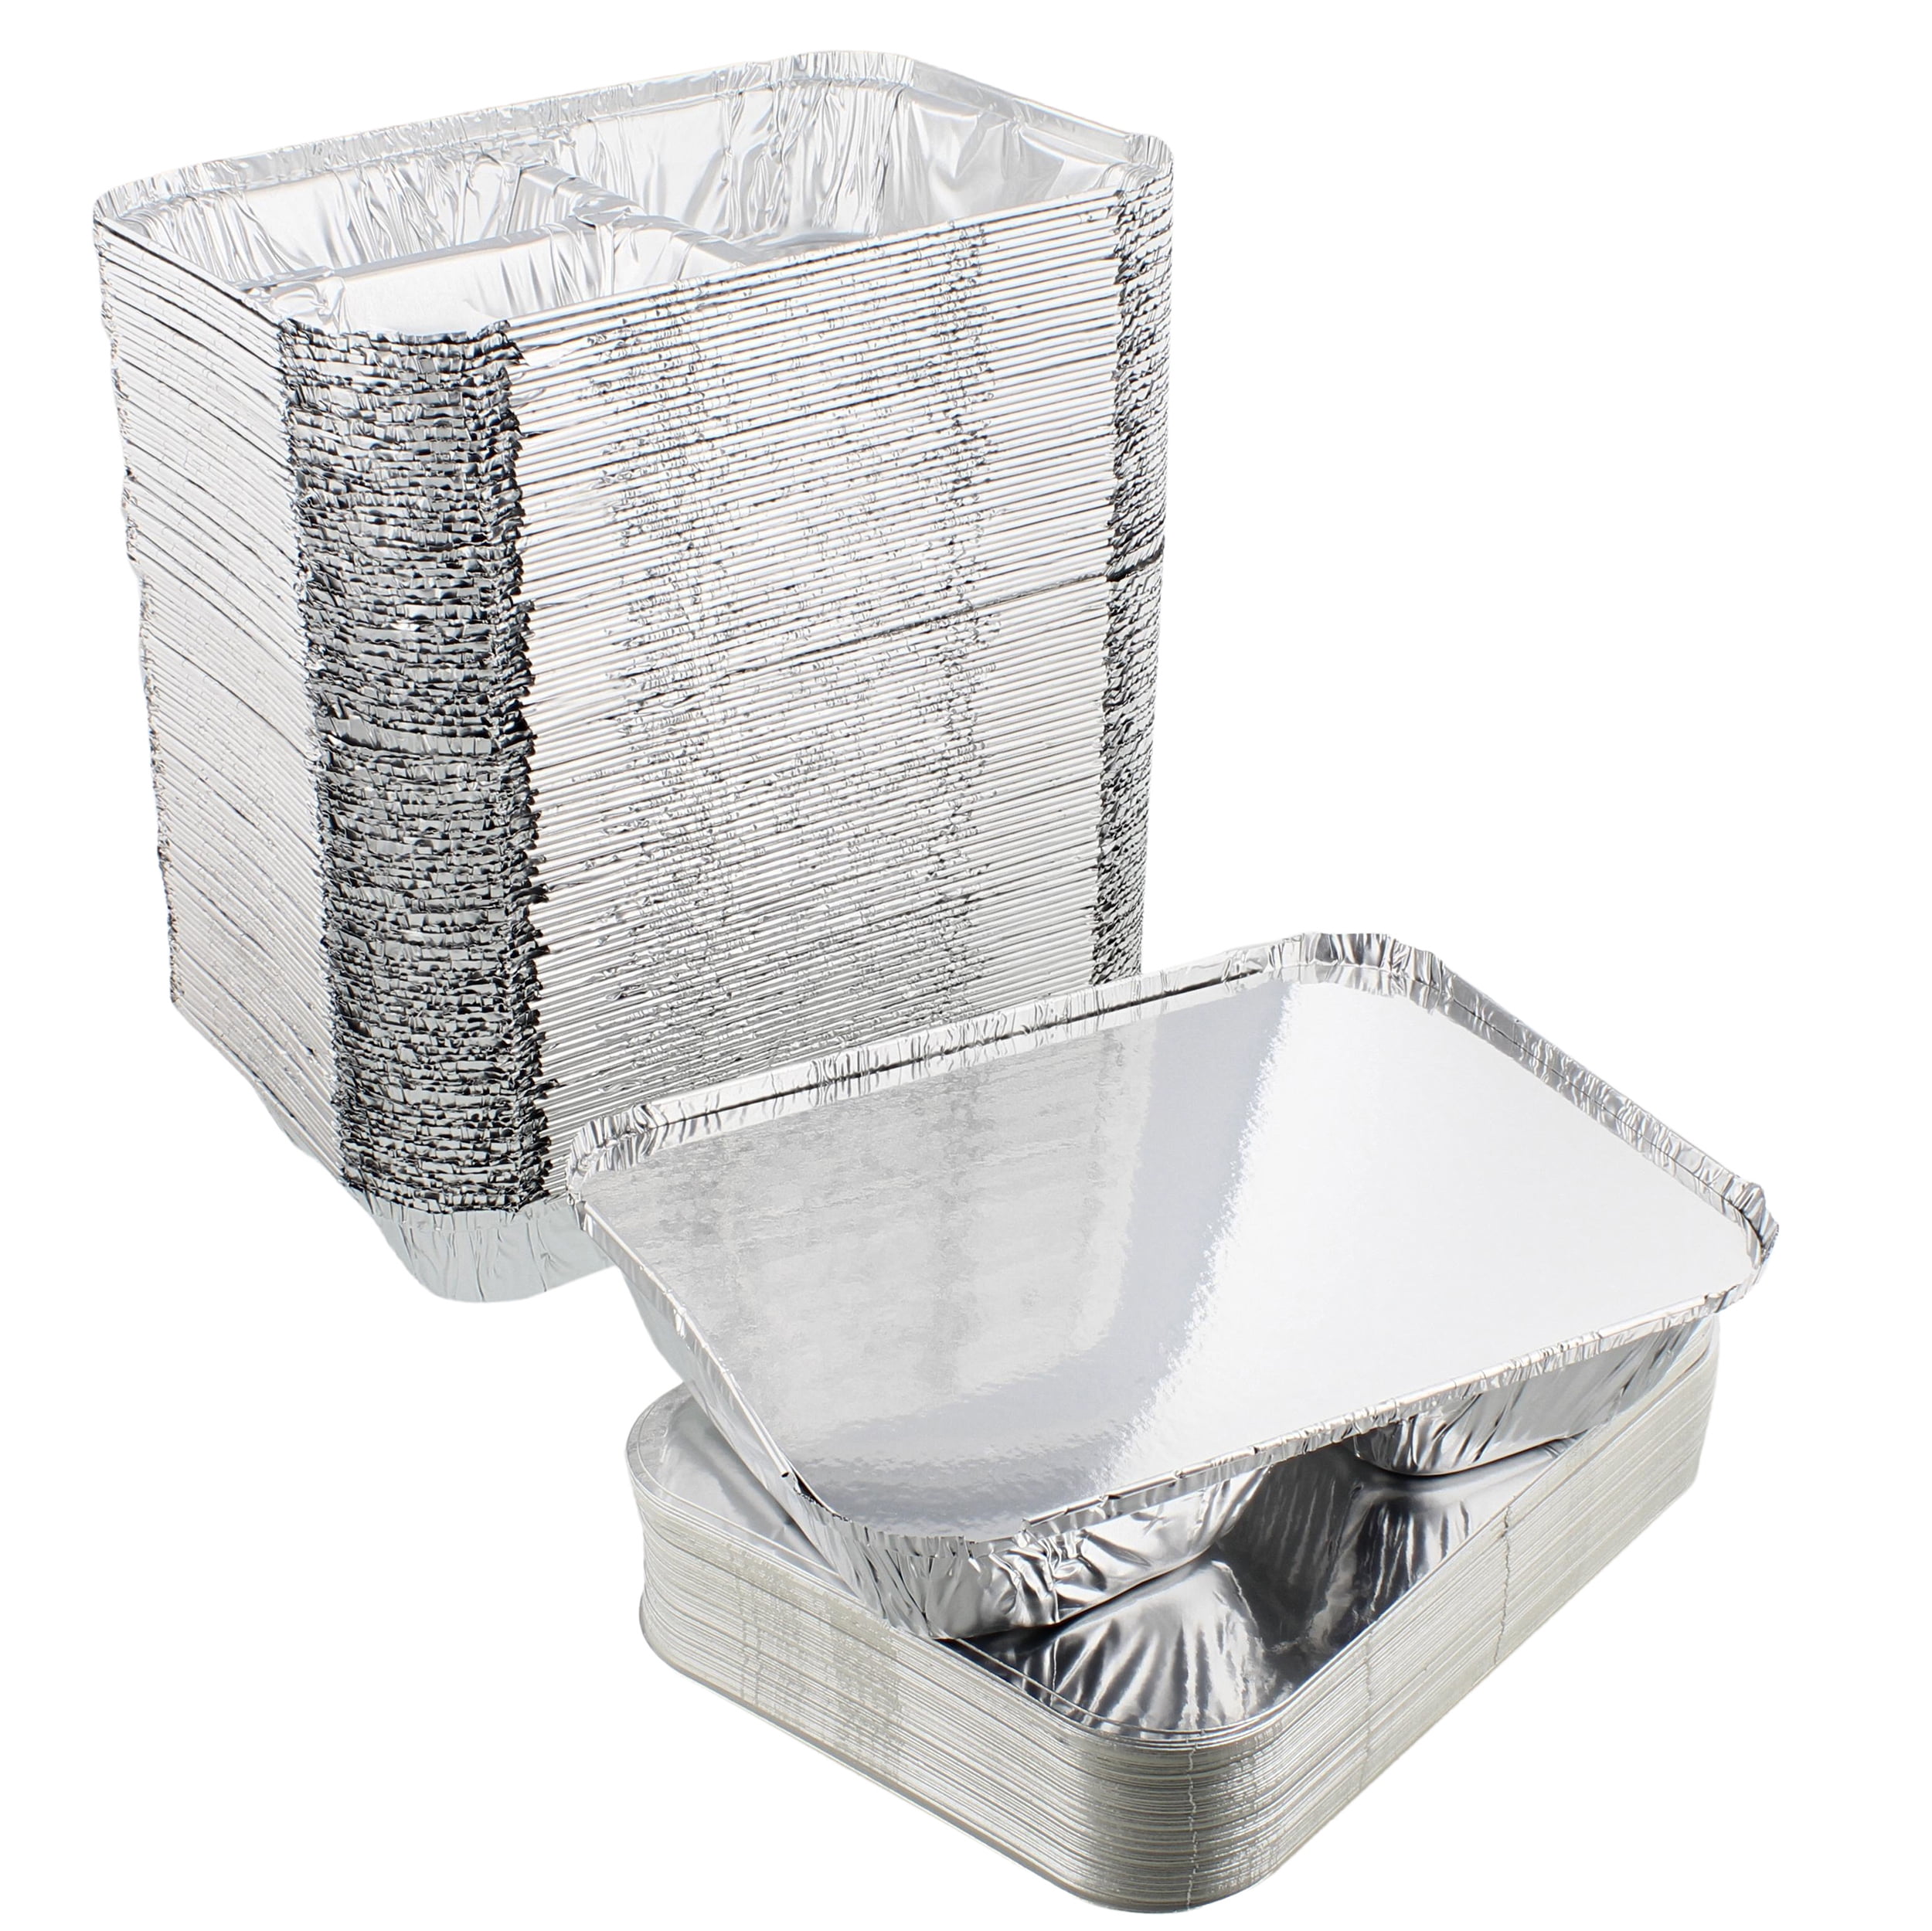  Lot45 Aluminum Catering Pan 3 Sections, 10pk - Disposable Aluminum  Tray Foil Pans, Oven Pans Take Out Pans for Catering: Home & Kitchen